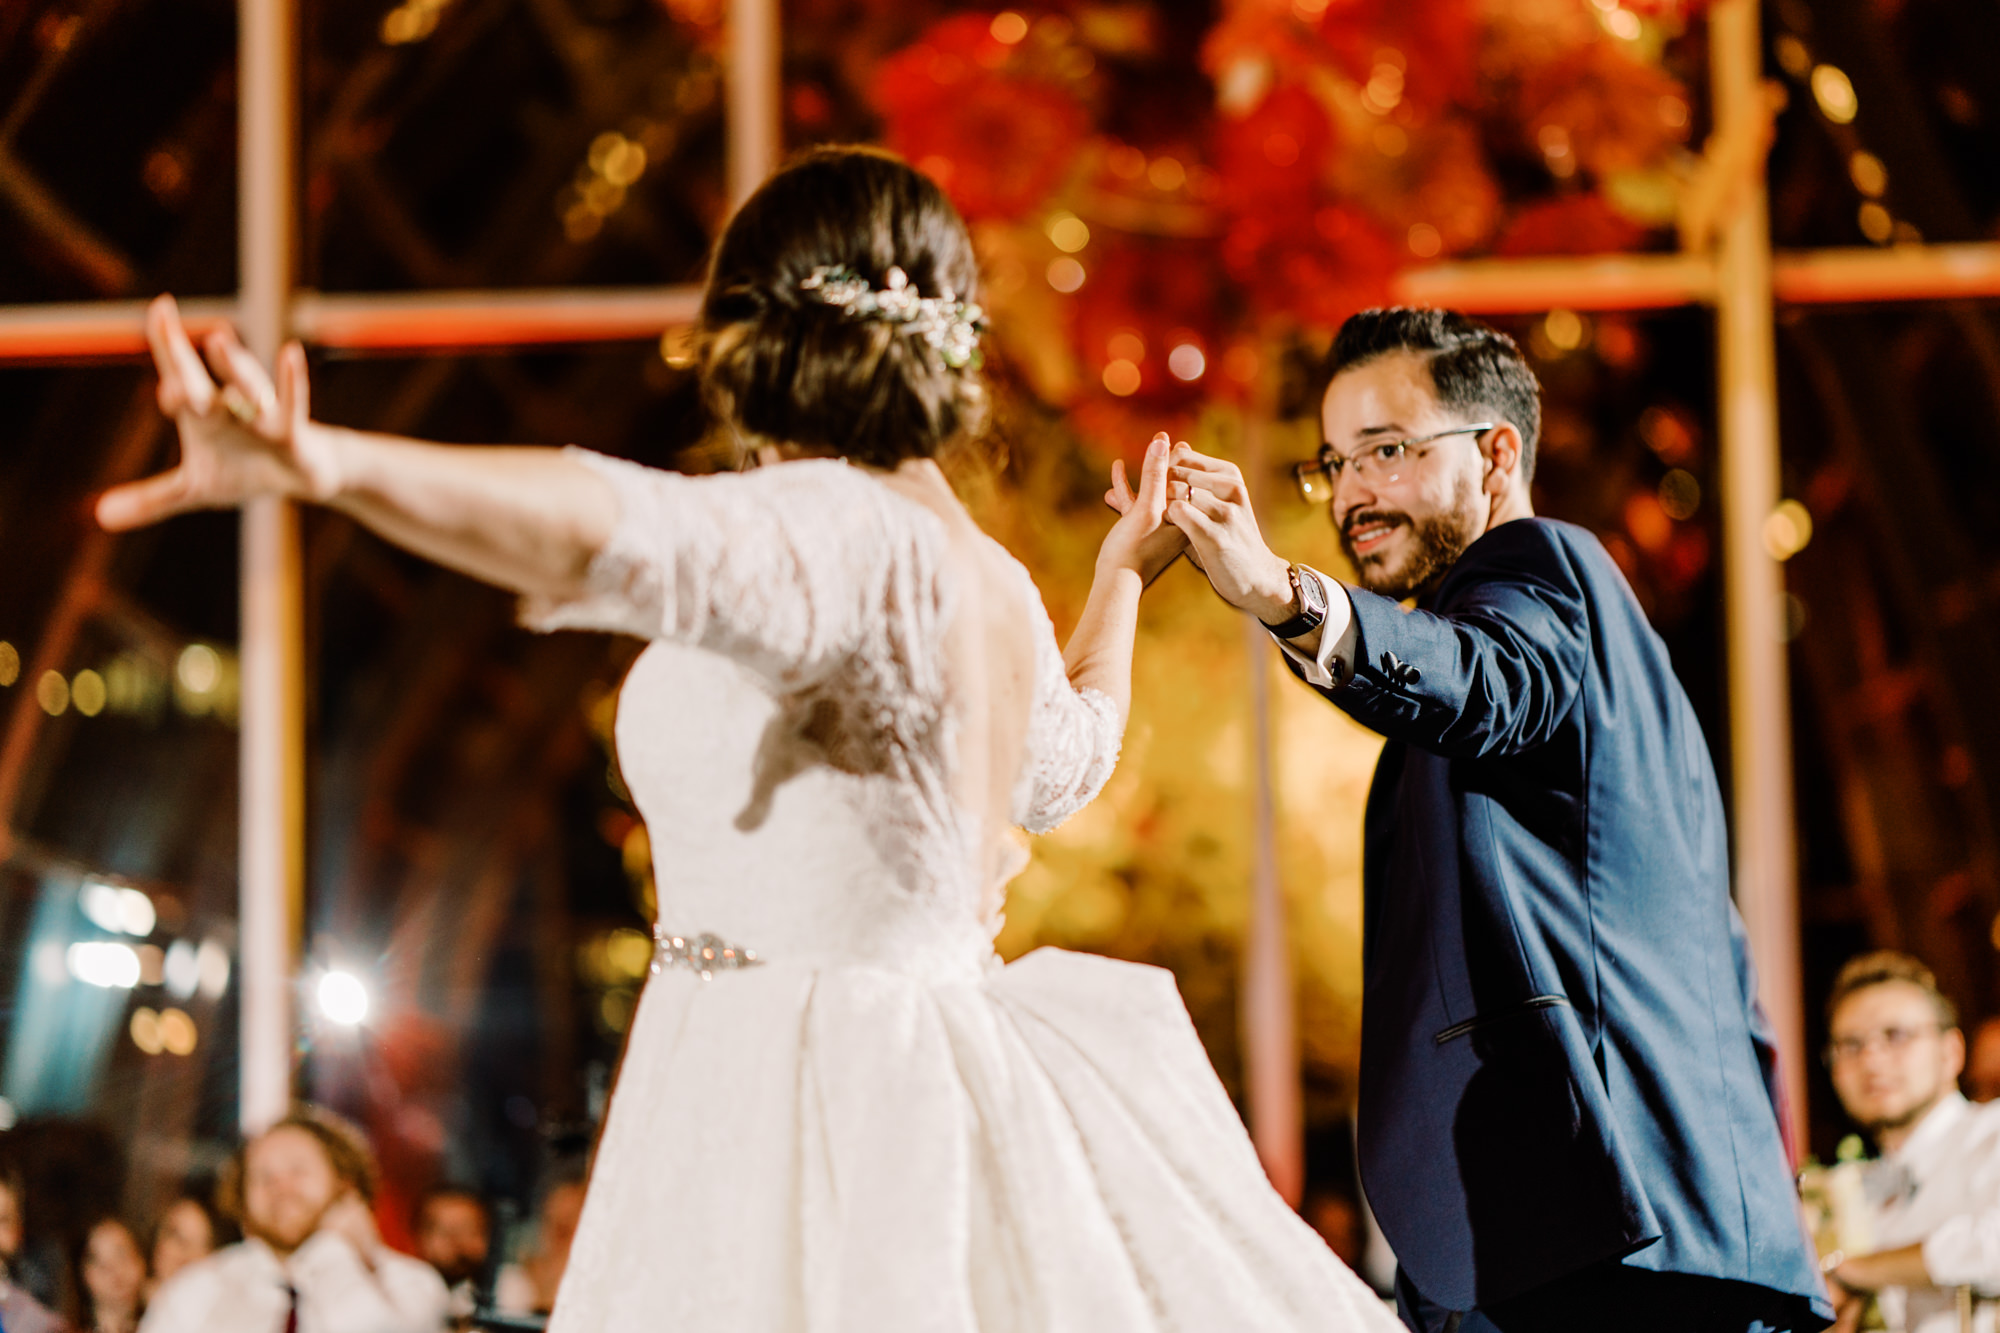 Lauren and Kyle's first dance at their wedding at Chihuly Garden and Glass